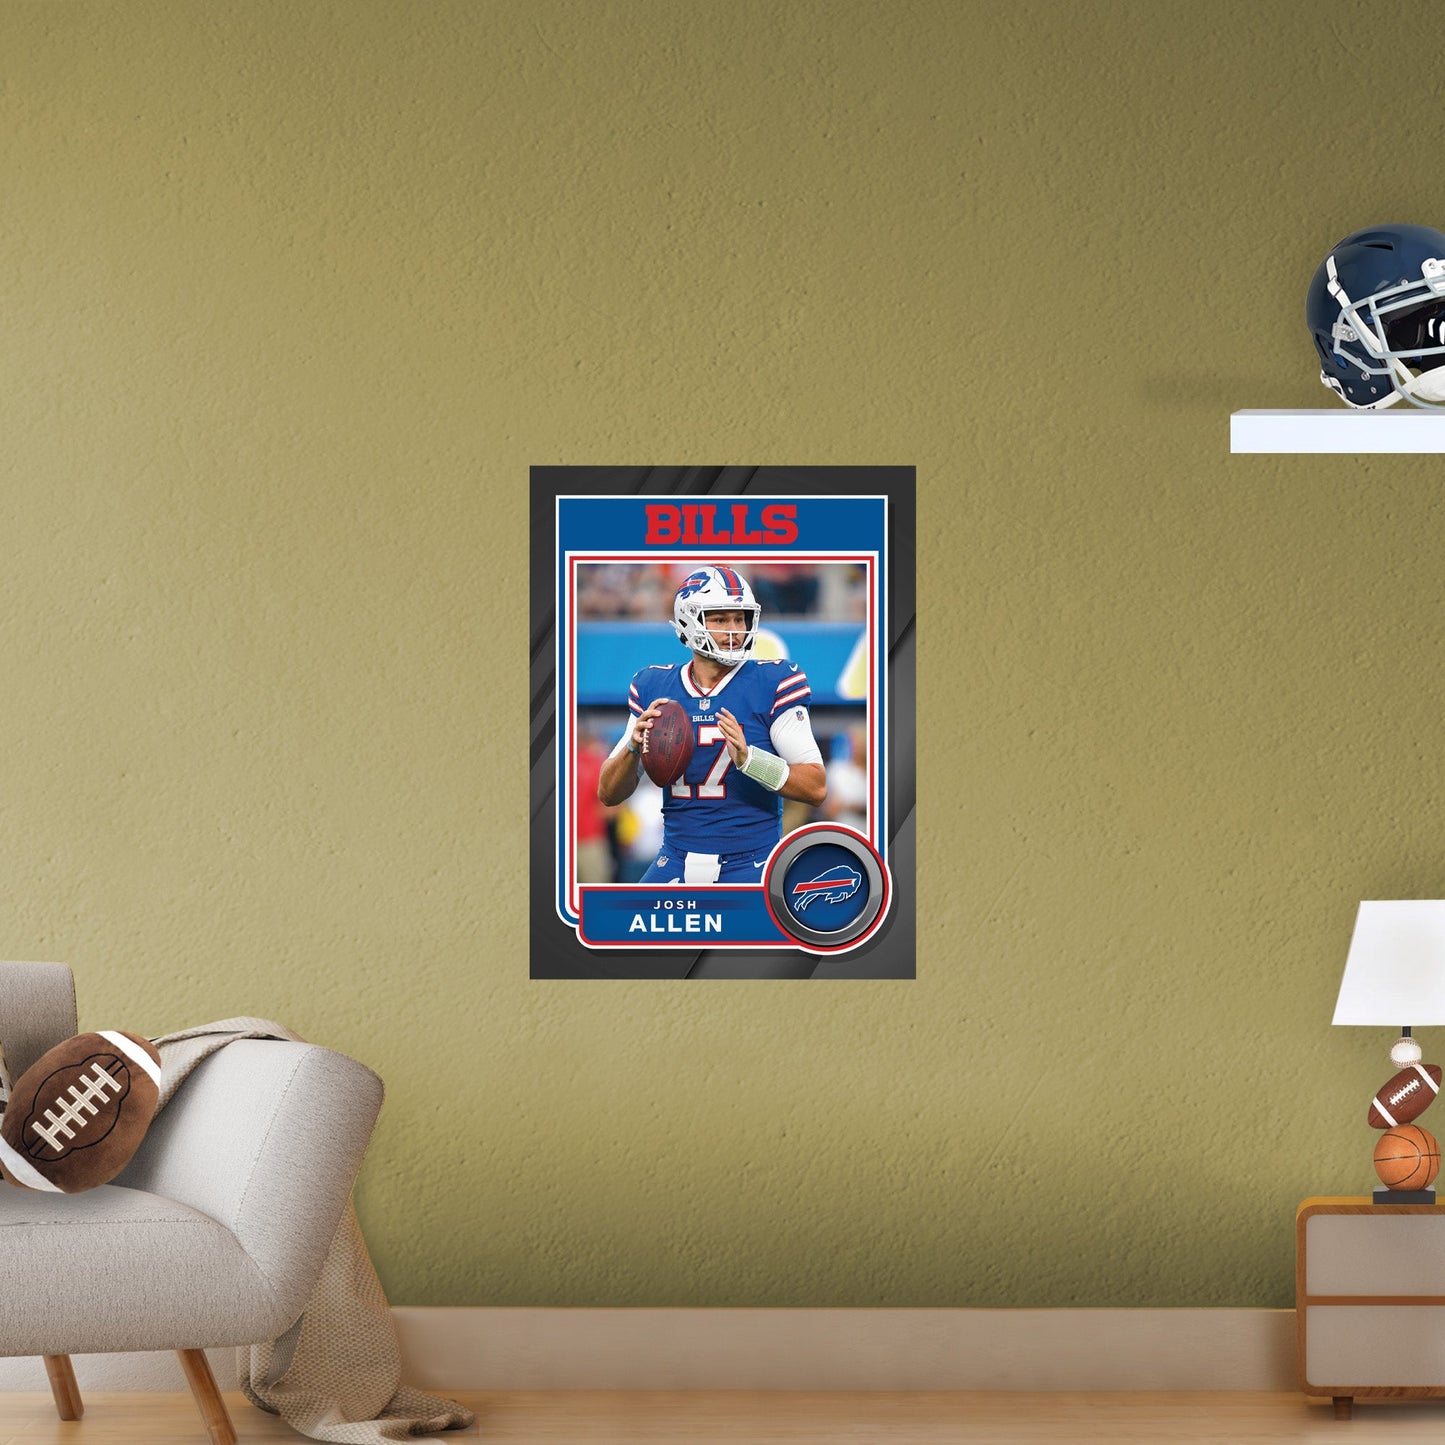 Buffalo Bills: Josh Allen Poster - Officially Licensed NFL Removable Adhesive Decal